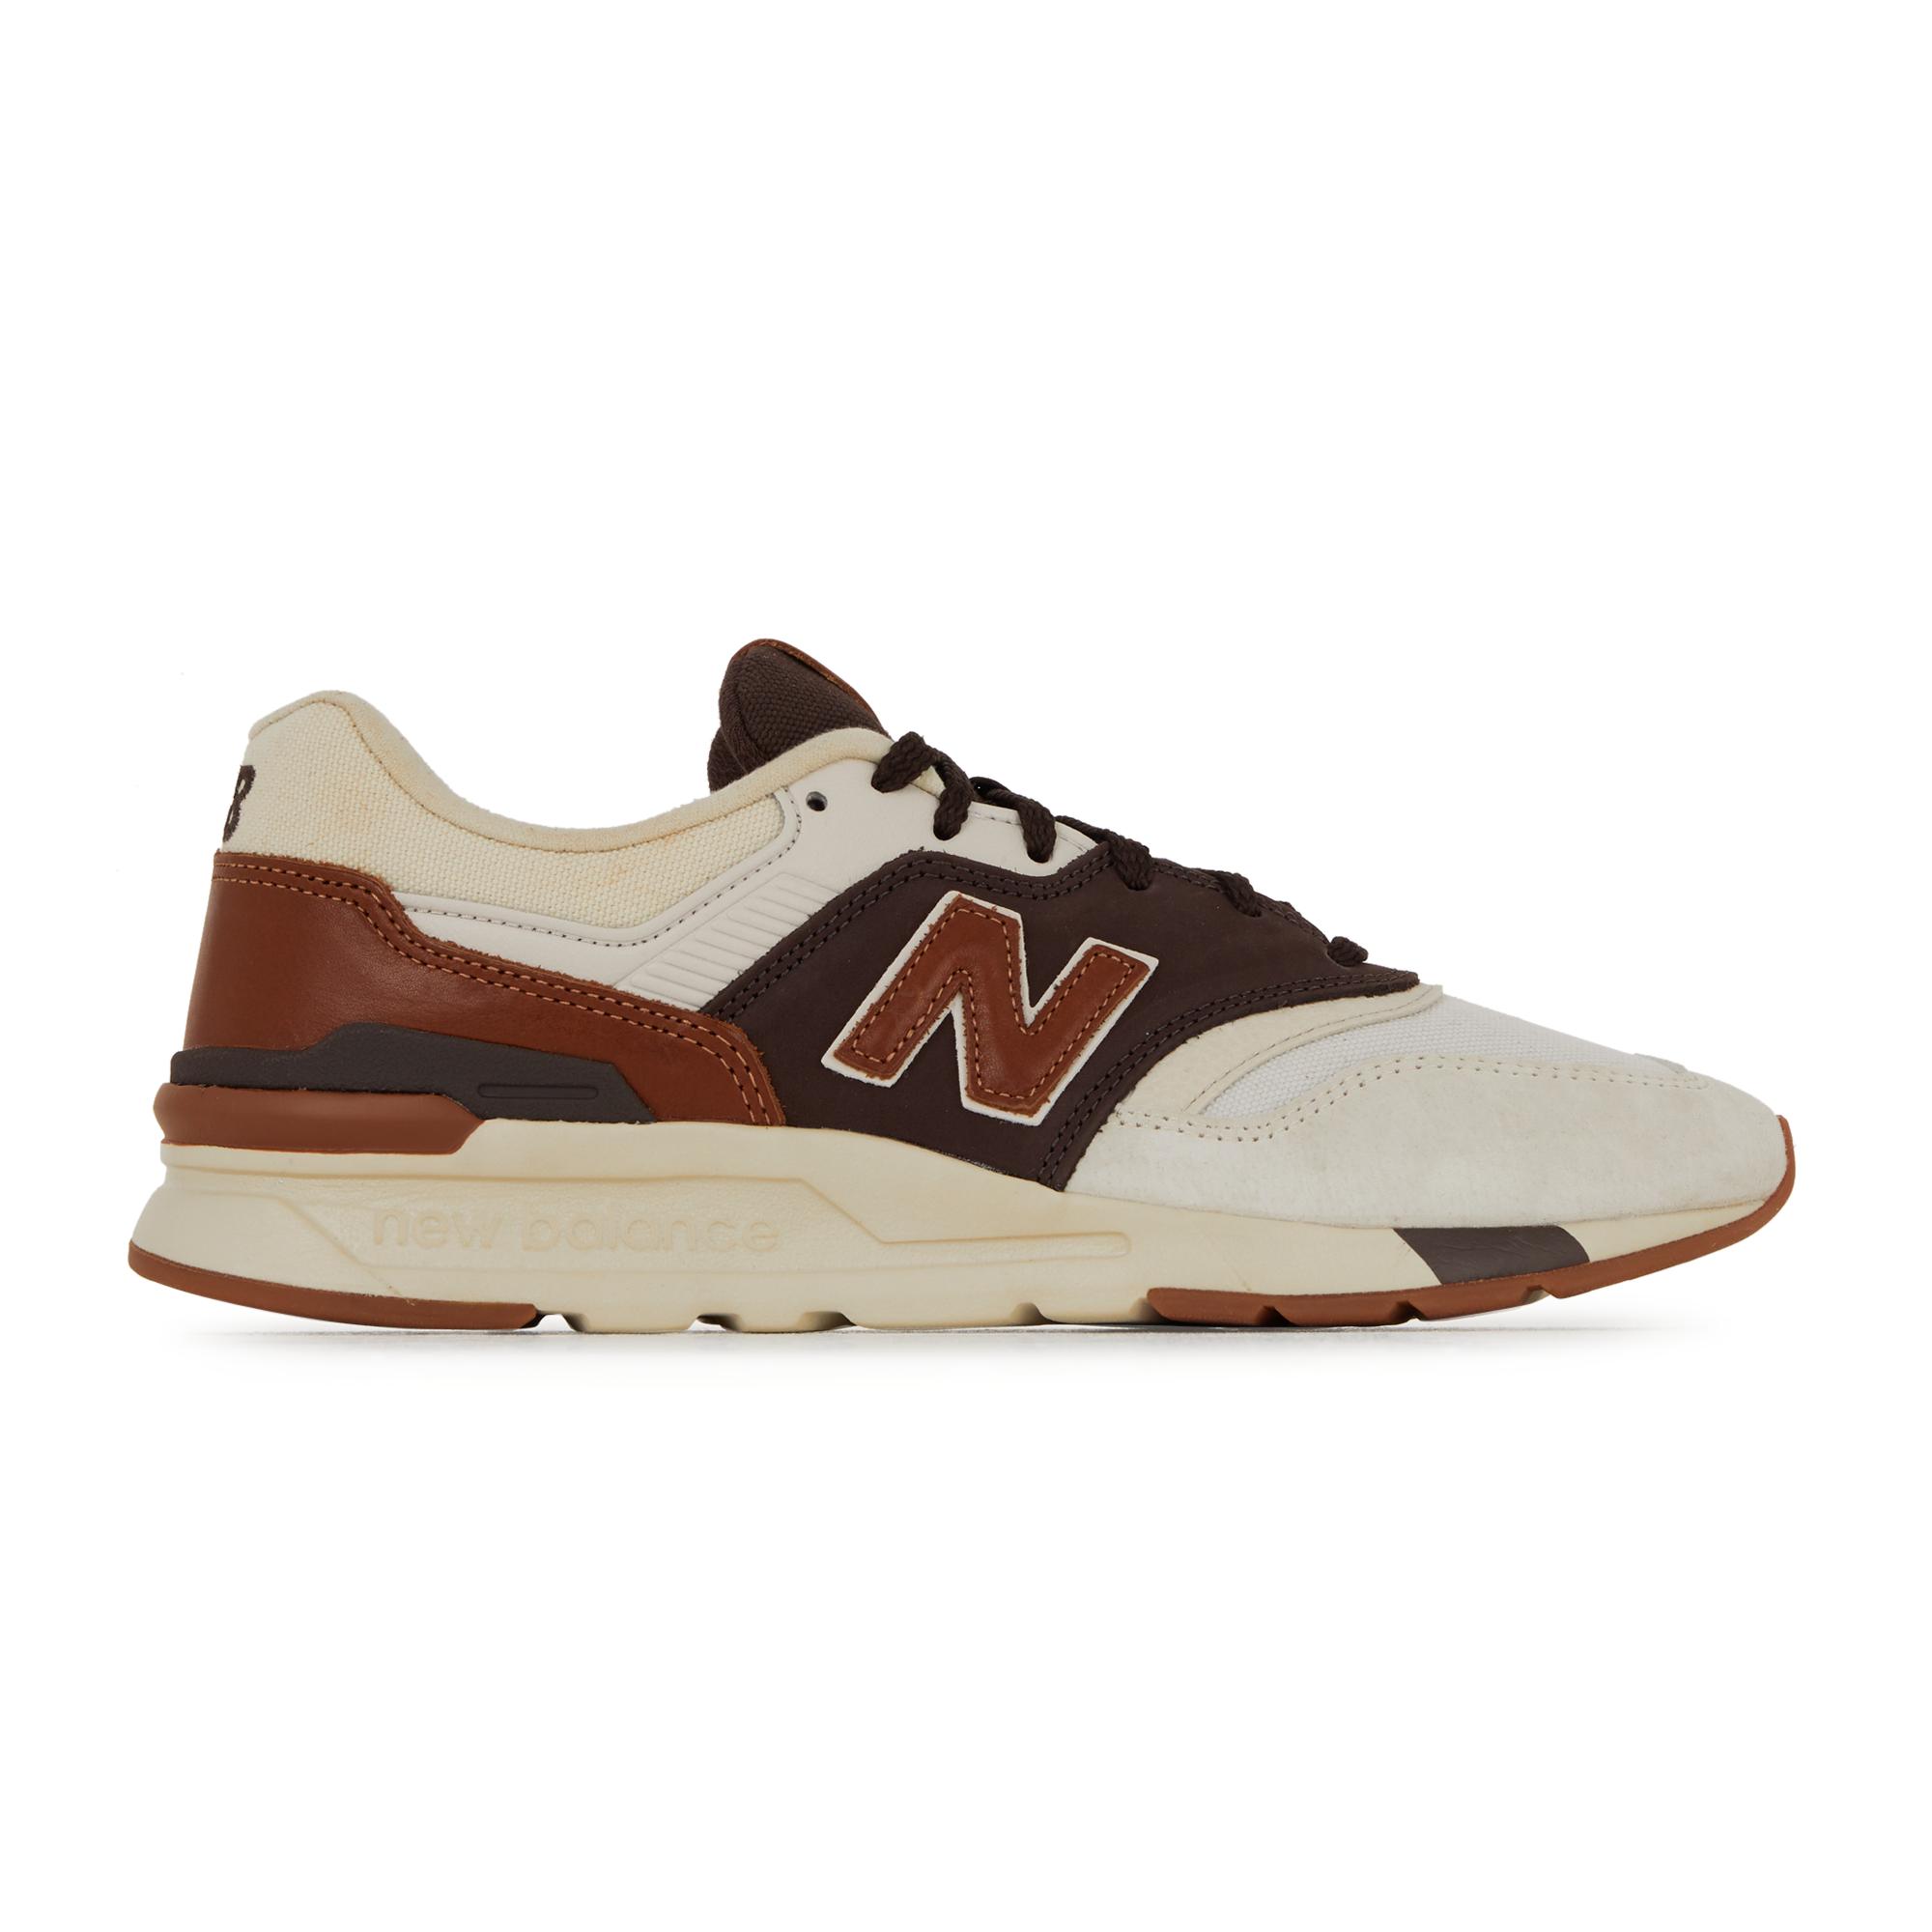 997 luxe New Balance pour homme - Lyst